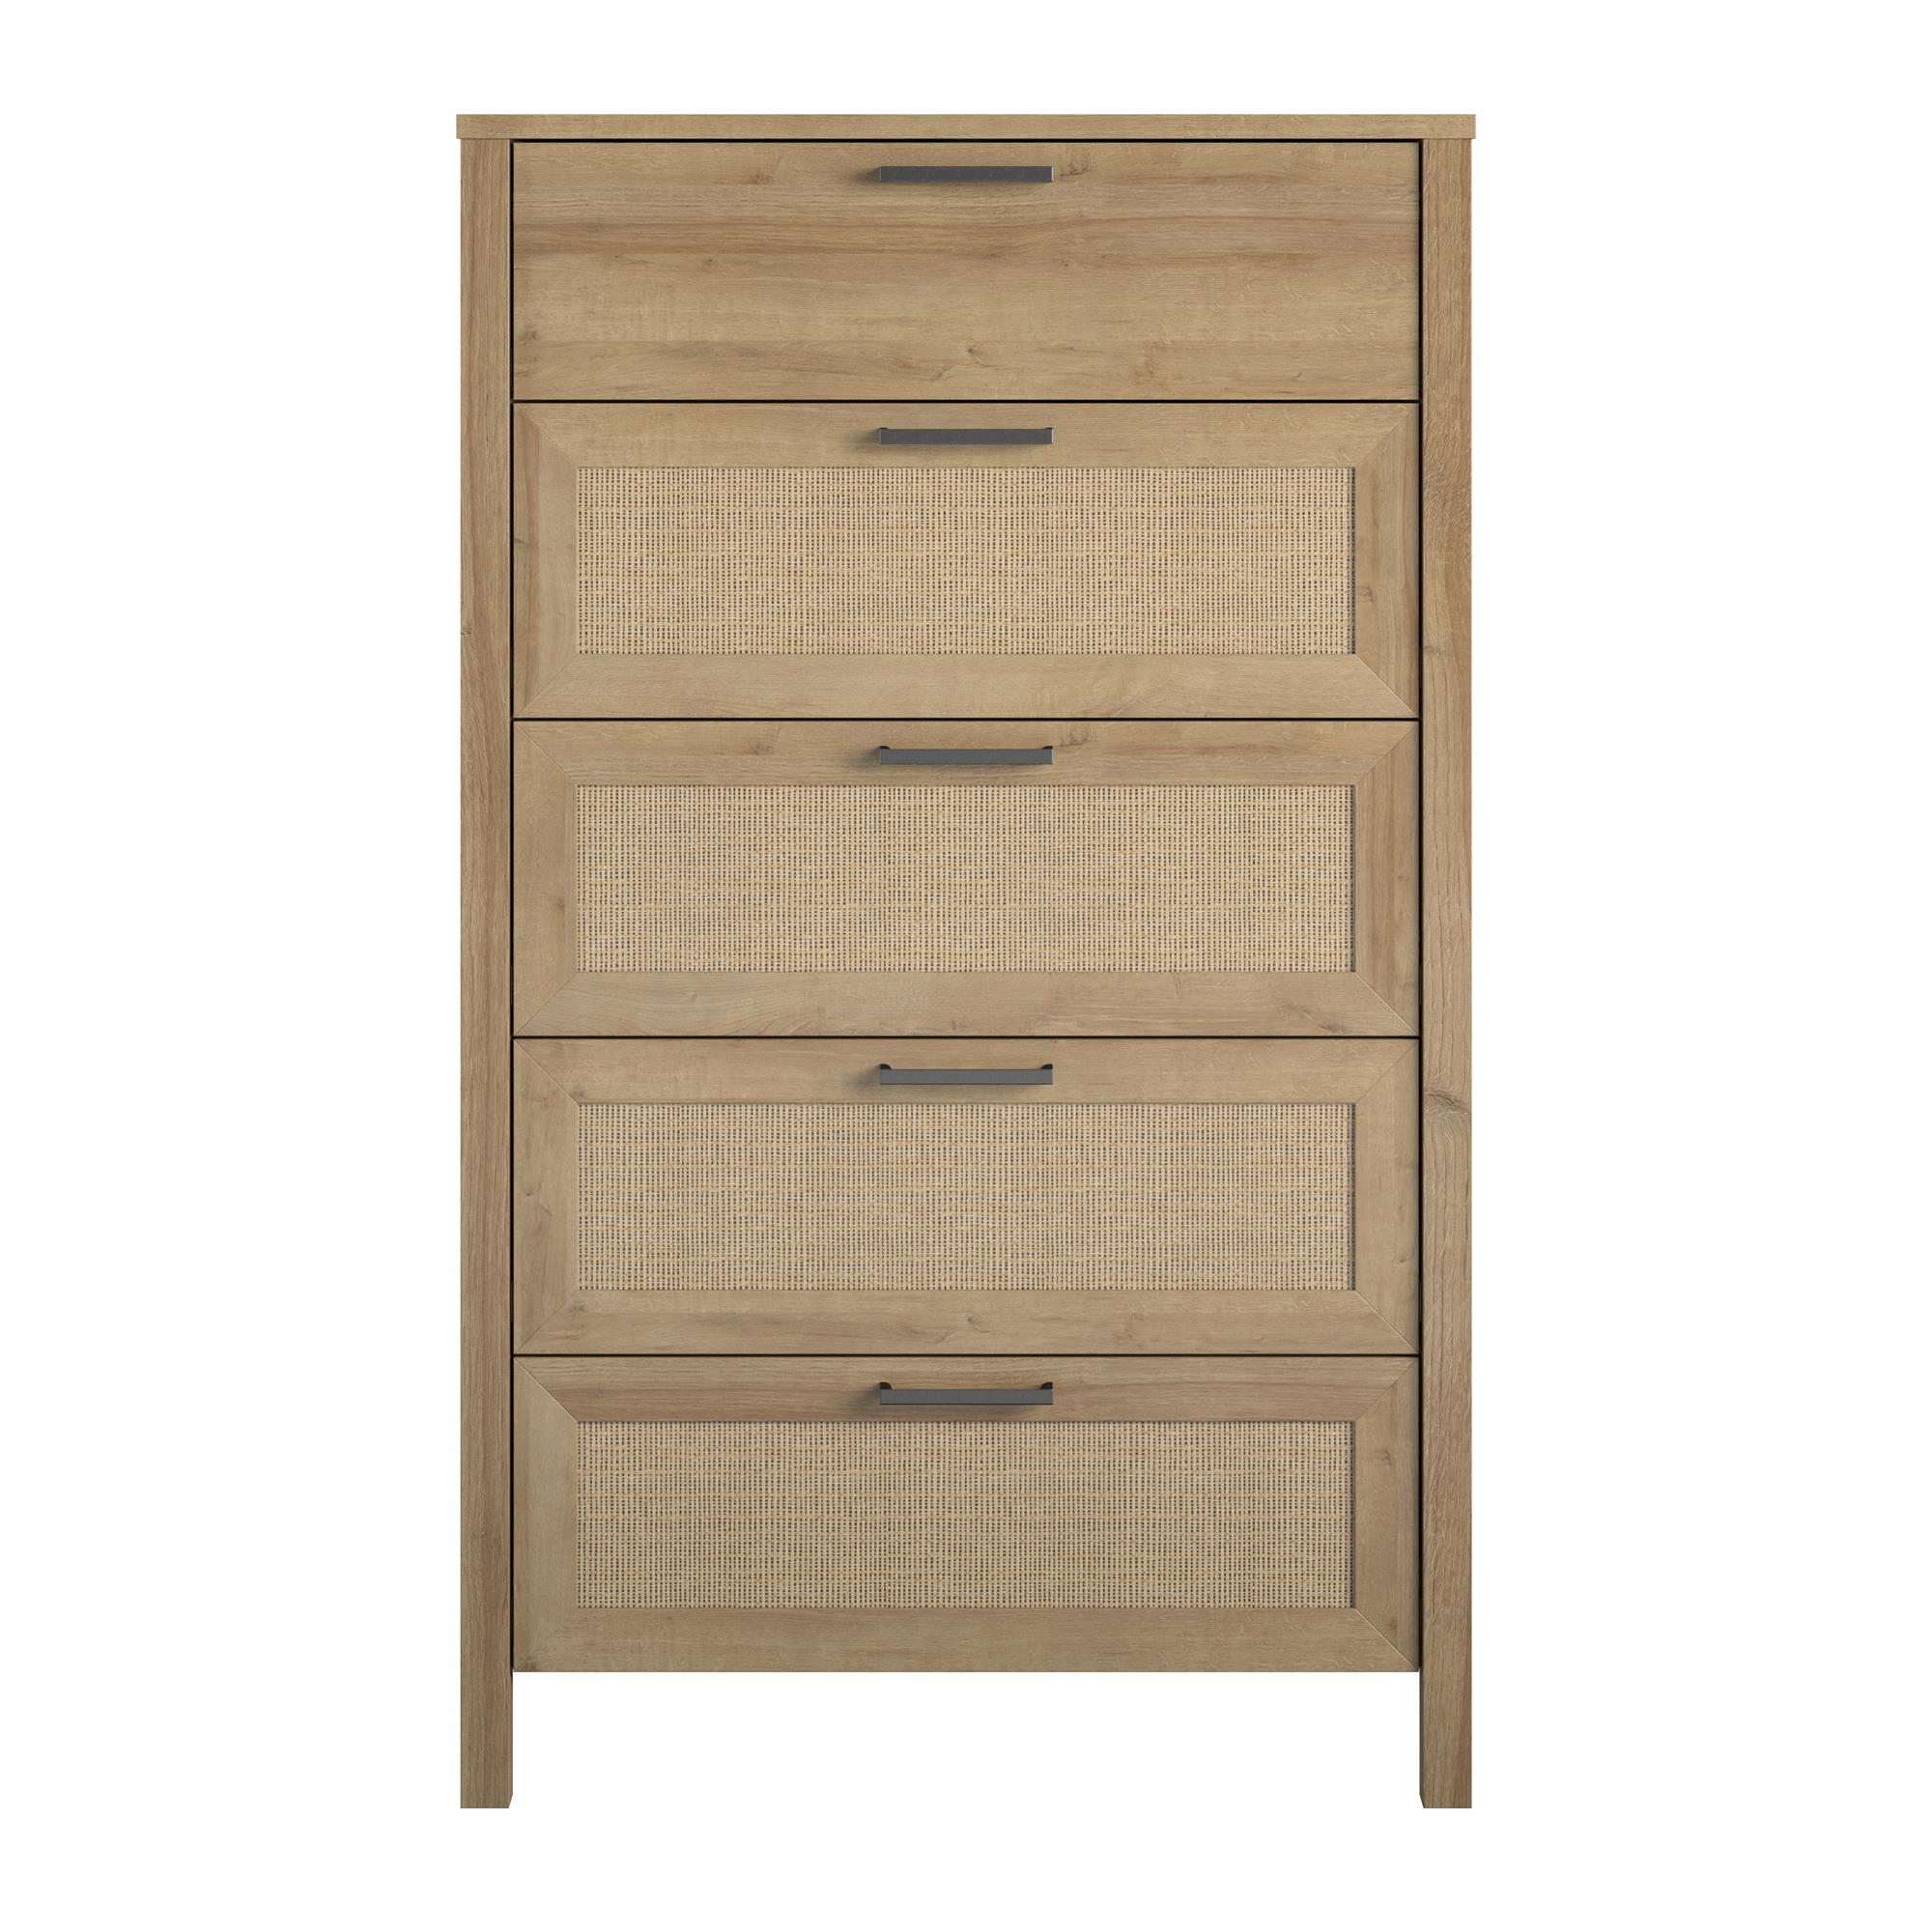 Ameriwood Home Wimberly 5-Drawer Dresser, Natural with Faux Rattan - image 3 of 12